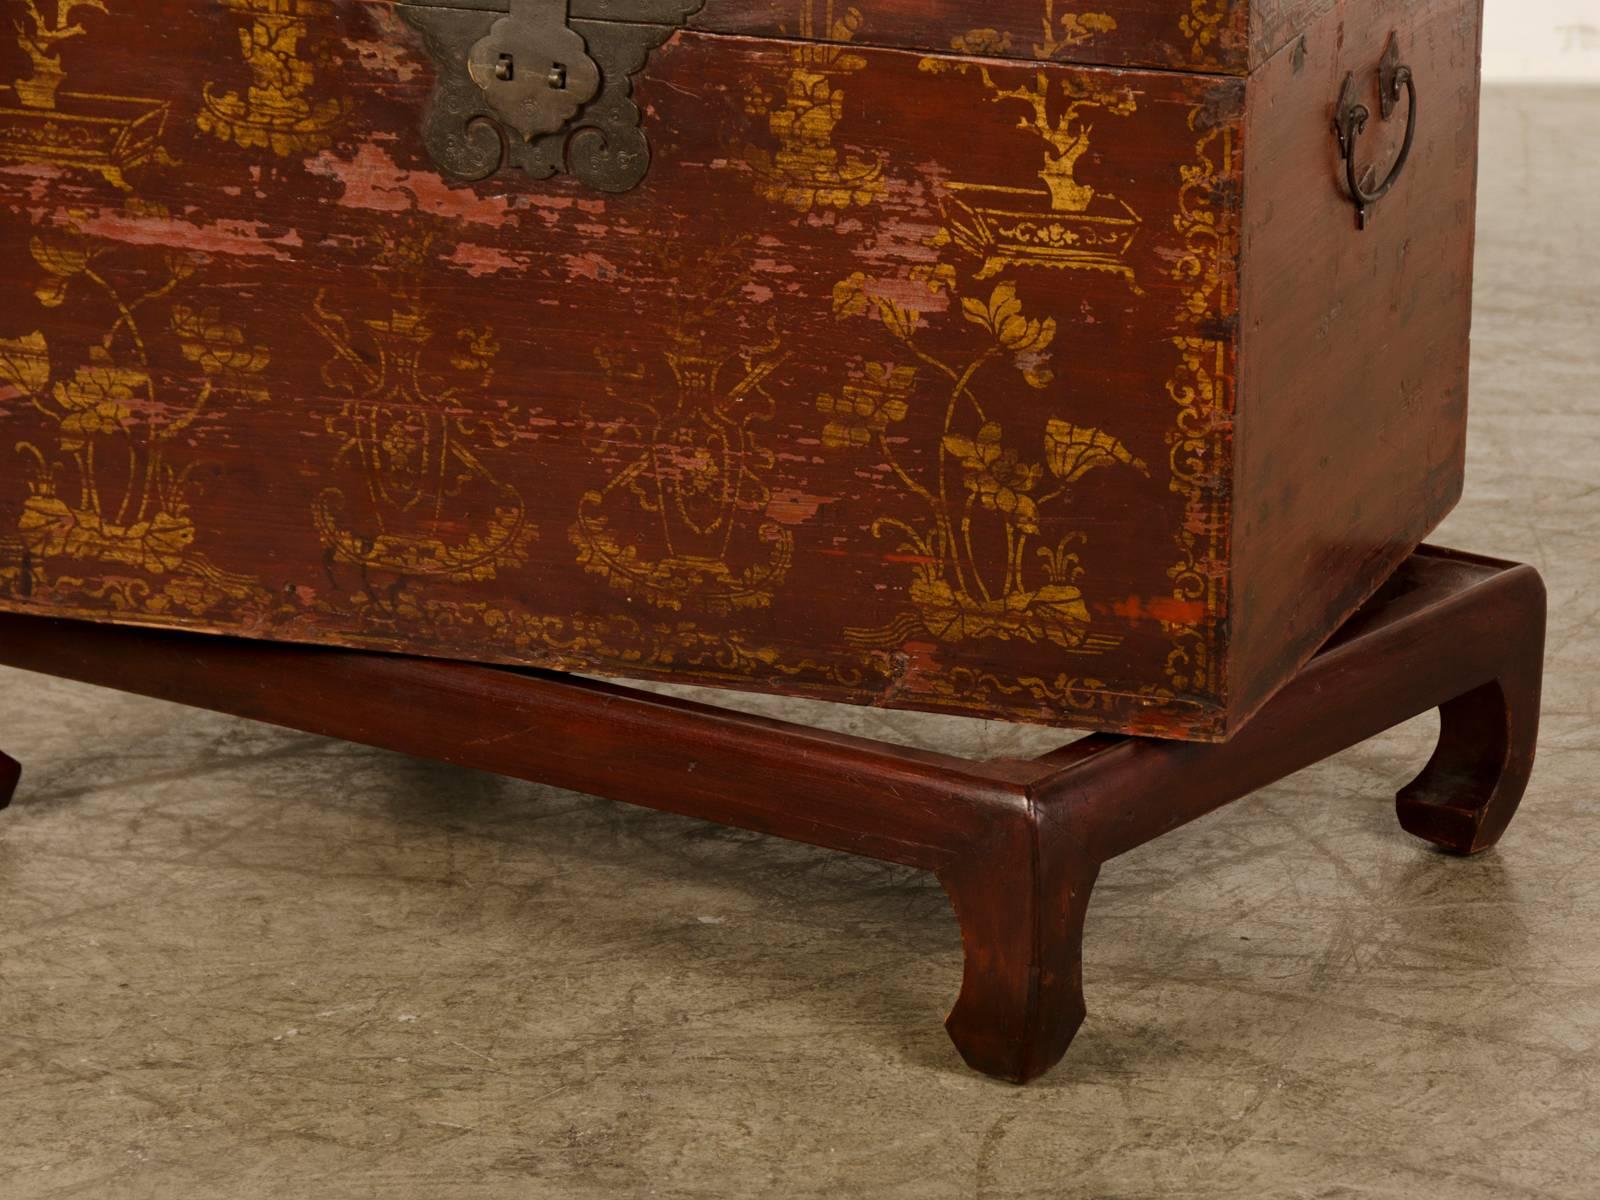 Gilt Red Lacquer Antique Chinese Trunk Kuang Hsu Period, circa 1875 For Sale